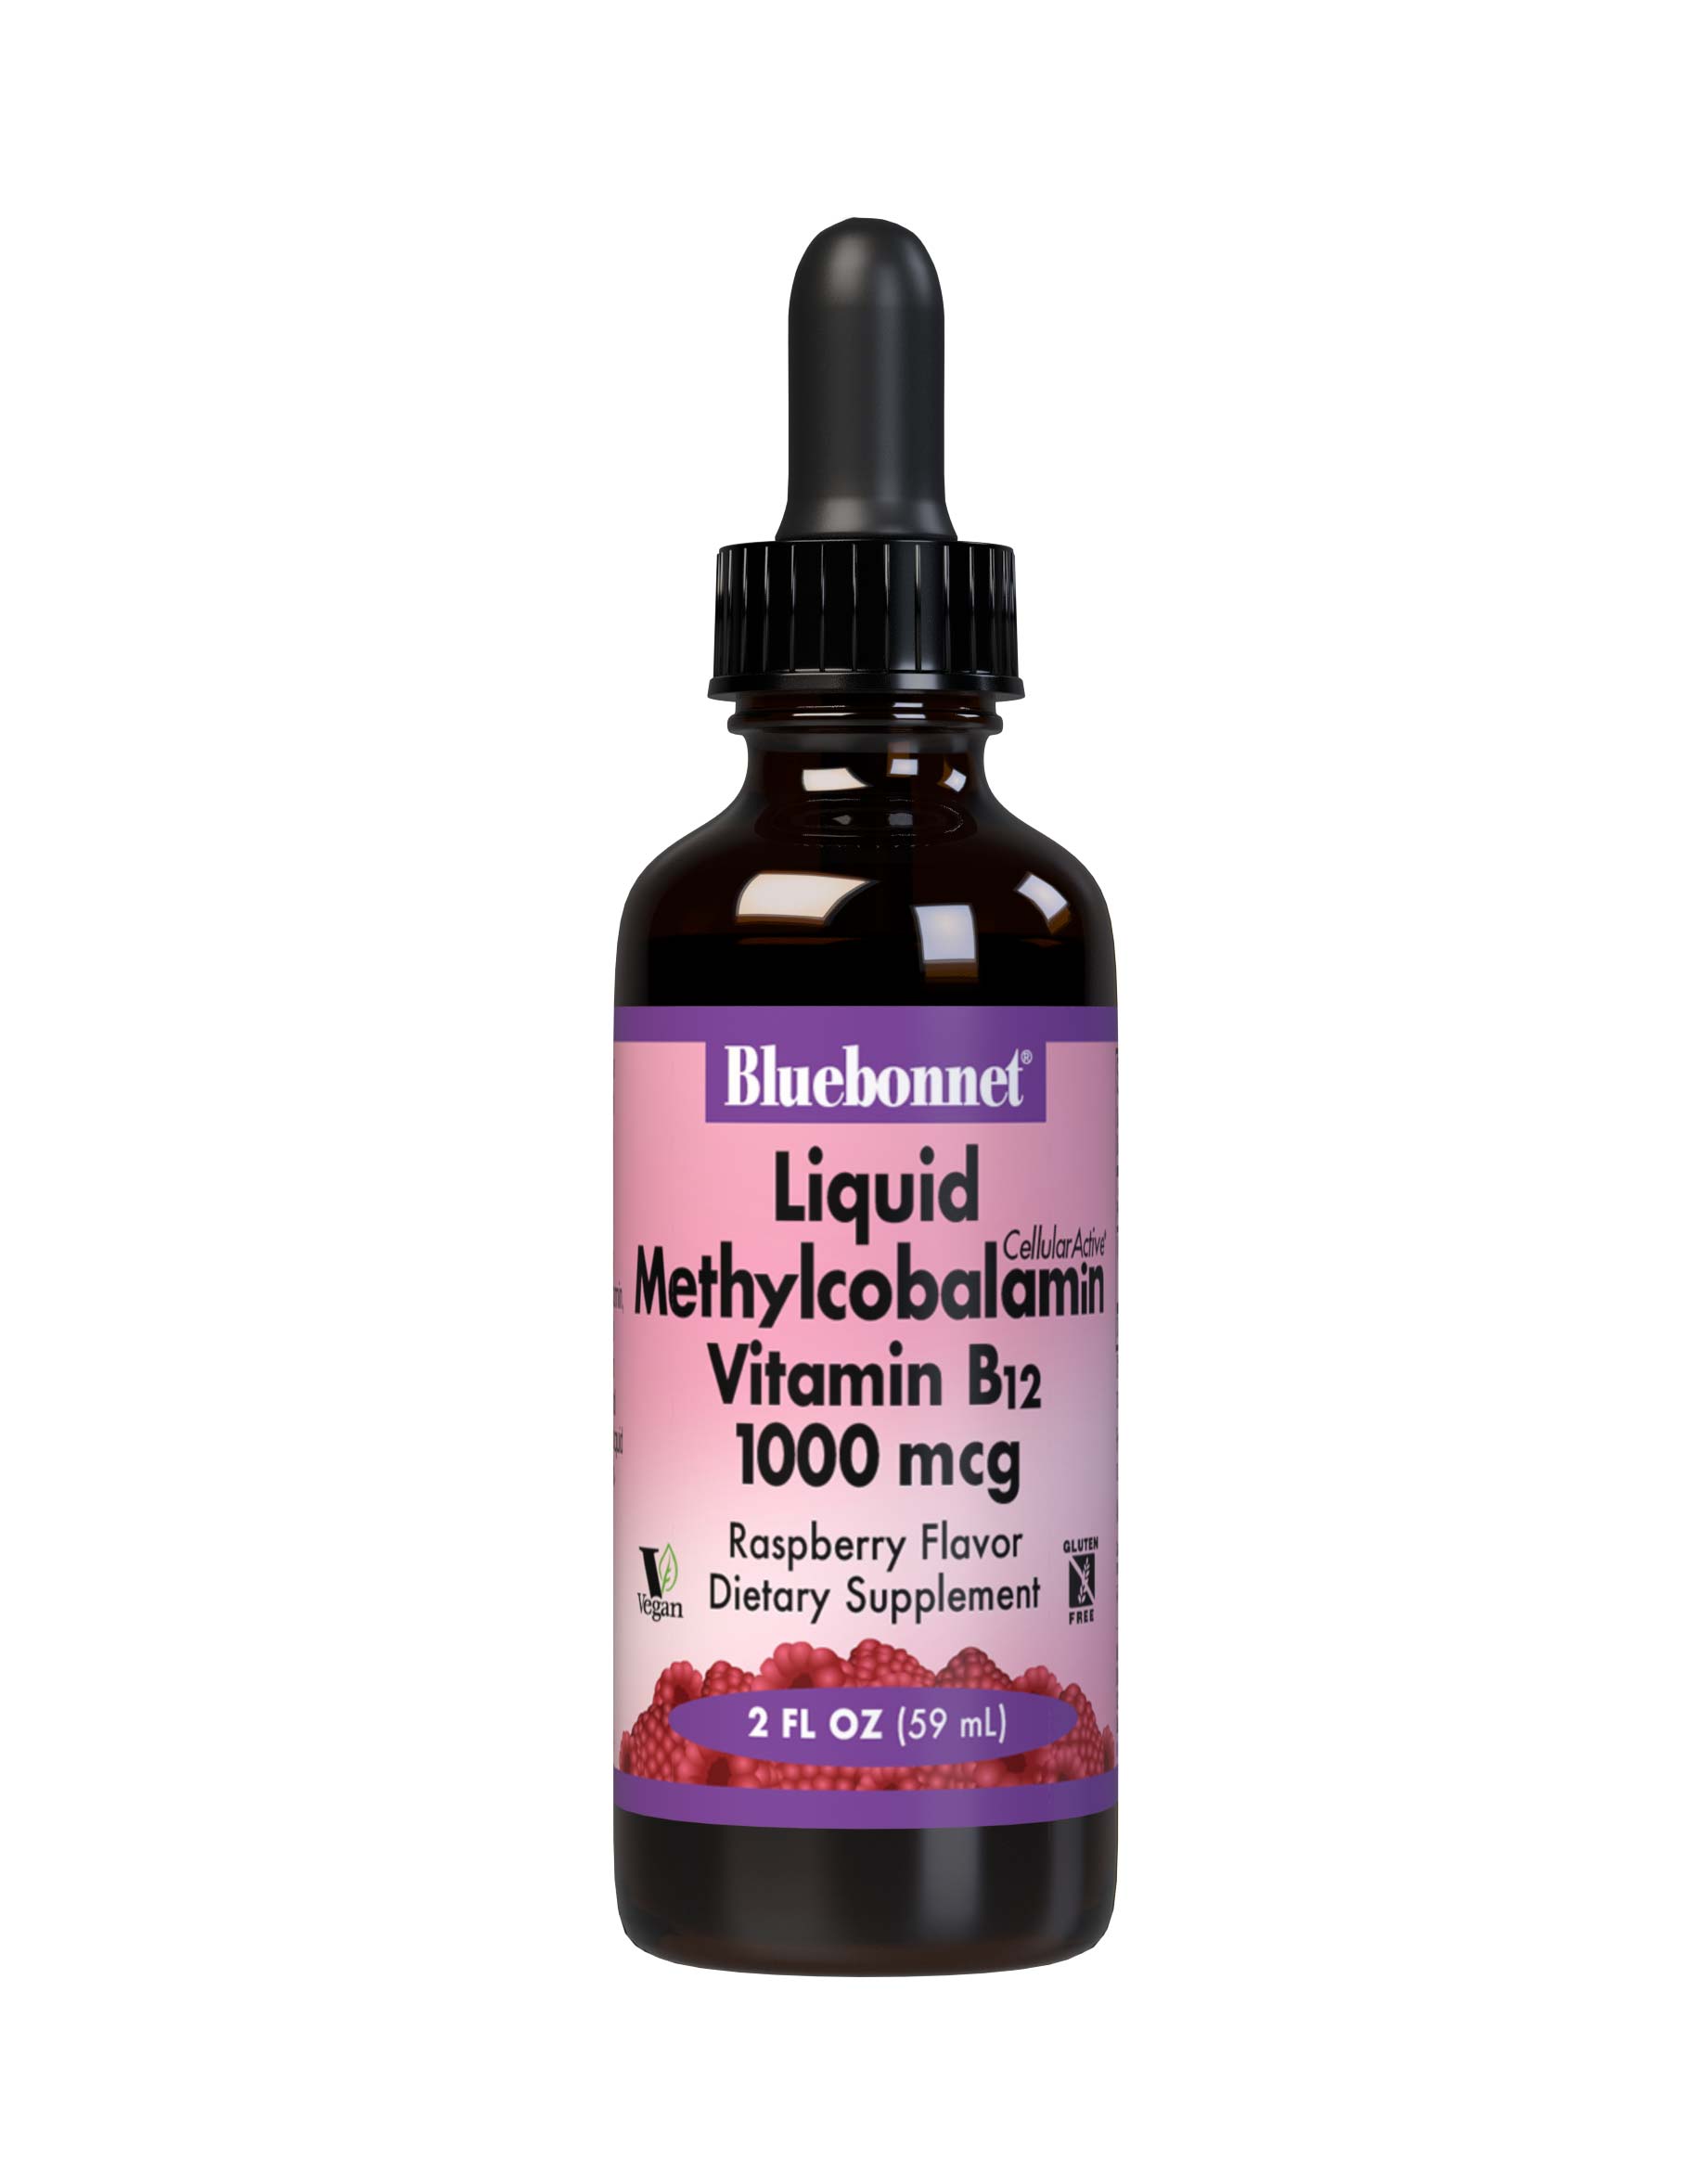 Bluebonnet’s Liquid CellularActive Methylcobalamin Vitamin B12 1000 mcg is formulated with fast-acting vitamin B12 as methylcobalamin, a coenzyme form of B12, which may be better utilized and better retained in the body. Vitamin B12 helps support cellular energy production and nervous system health. #size_2 fl oz